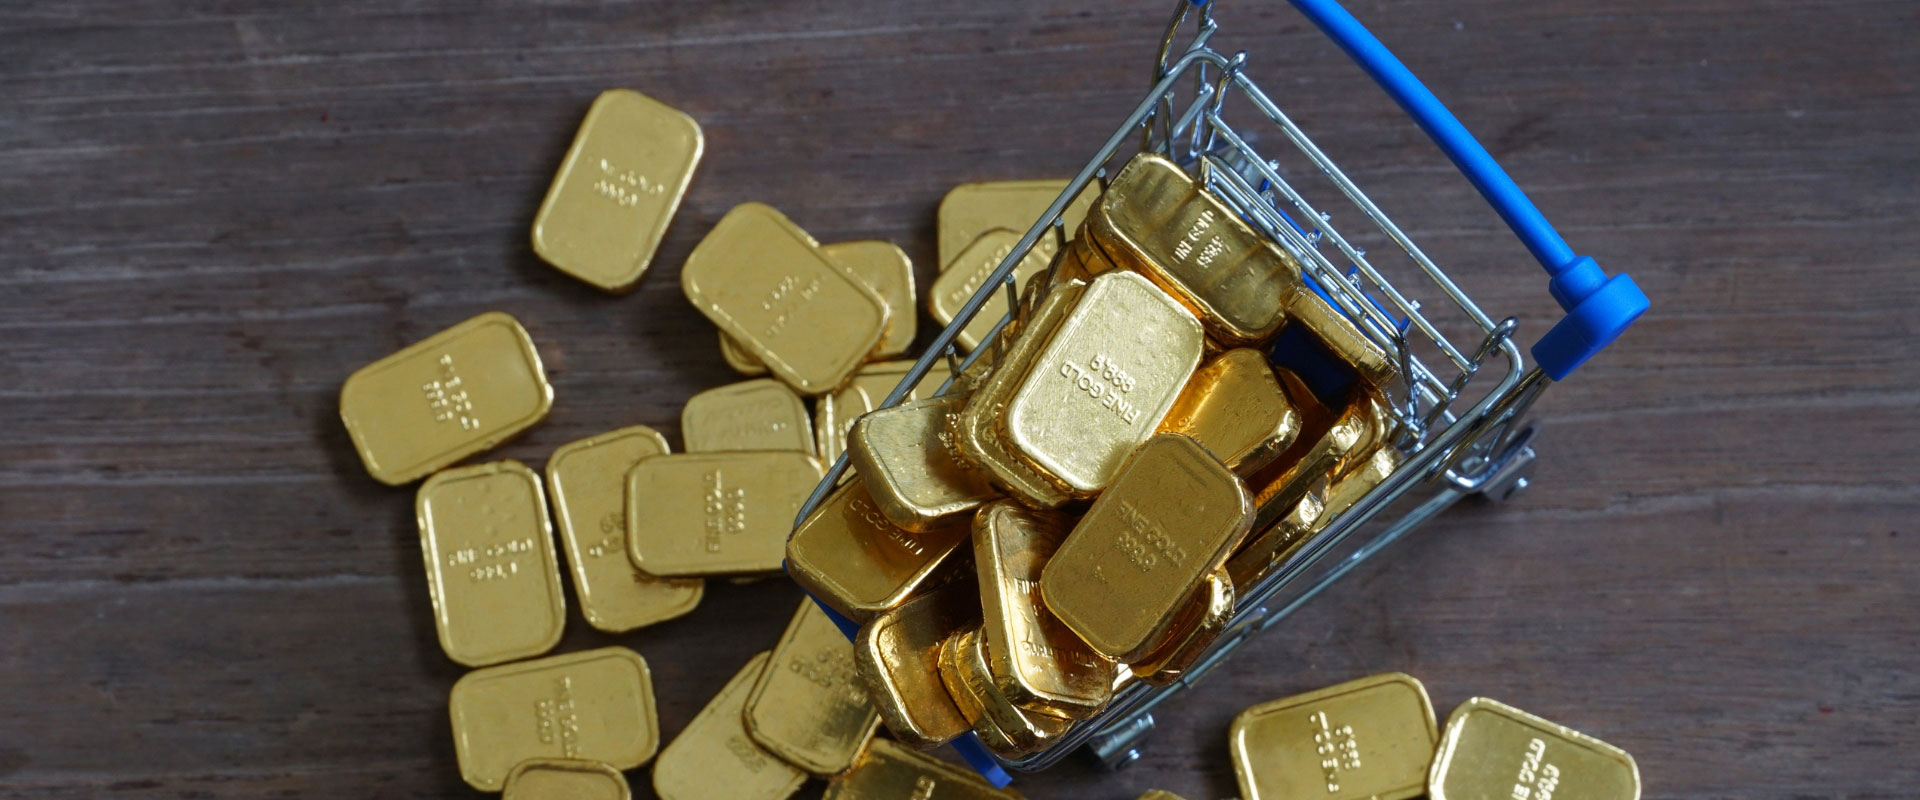 pile of gold bars in shopping cart